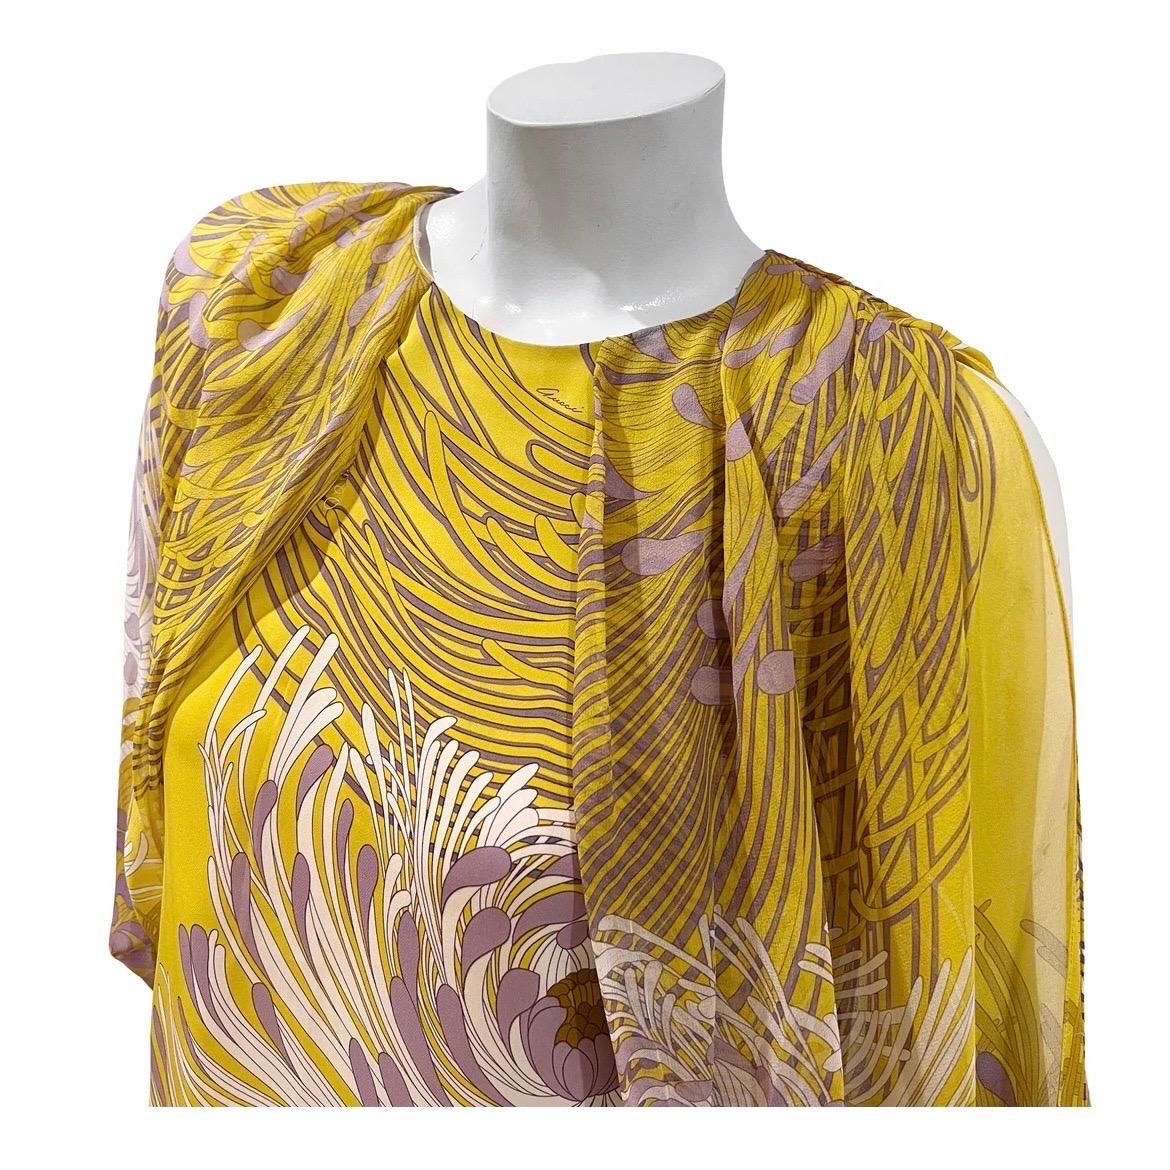 Floral chiffon blouse by Frida Giannini for Gucci 
Circa 2012 
Made in Italy
Chartreuse with violet and white floral motif throughout
Lined tank top shell
Open batwing semi-sheer sleeve with multi-button cuff closure
Slitted back with single button